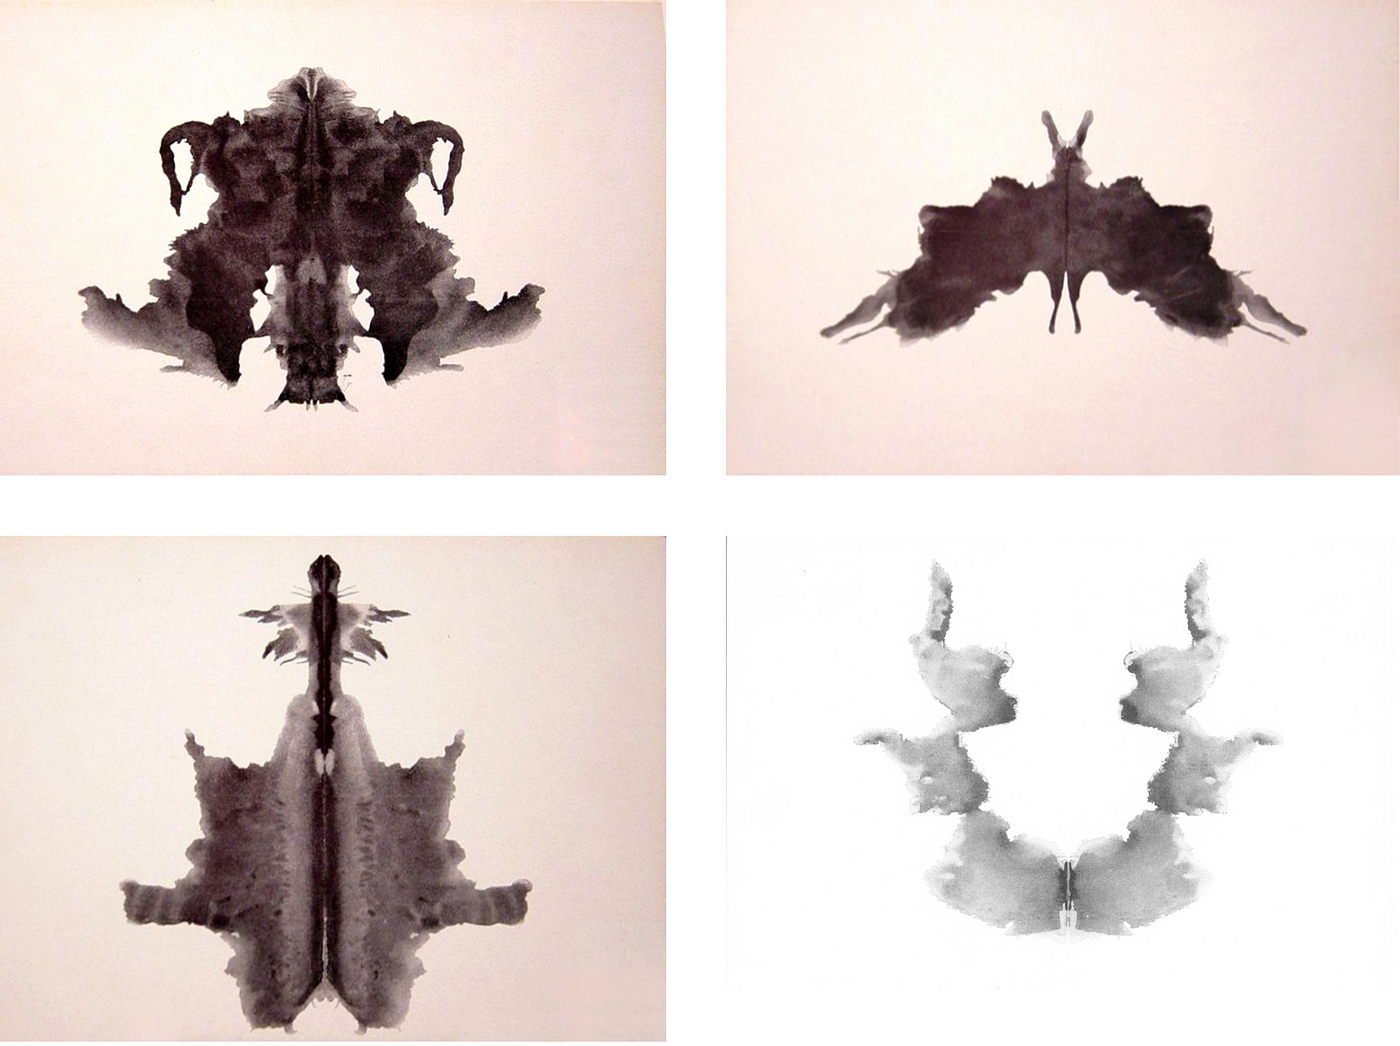 Tell Me What You See: The Rorschach Test and Its Inventor - The